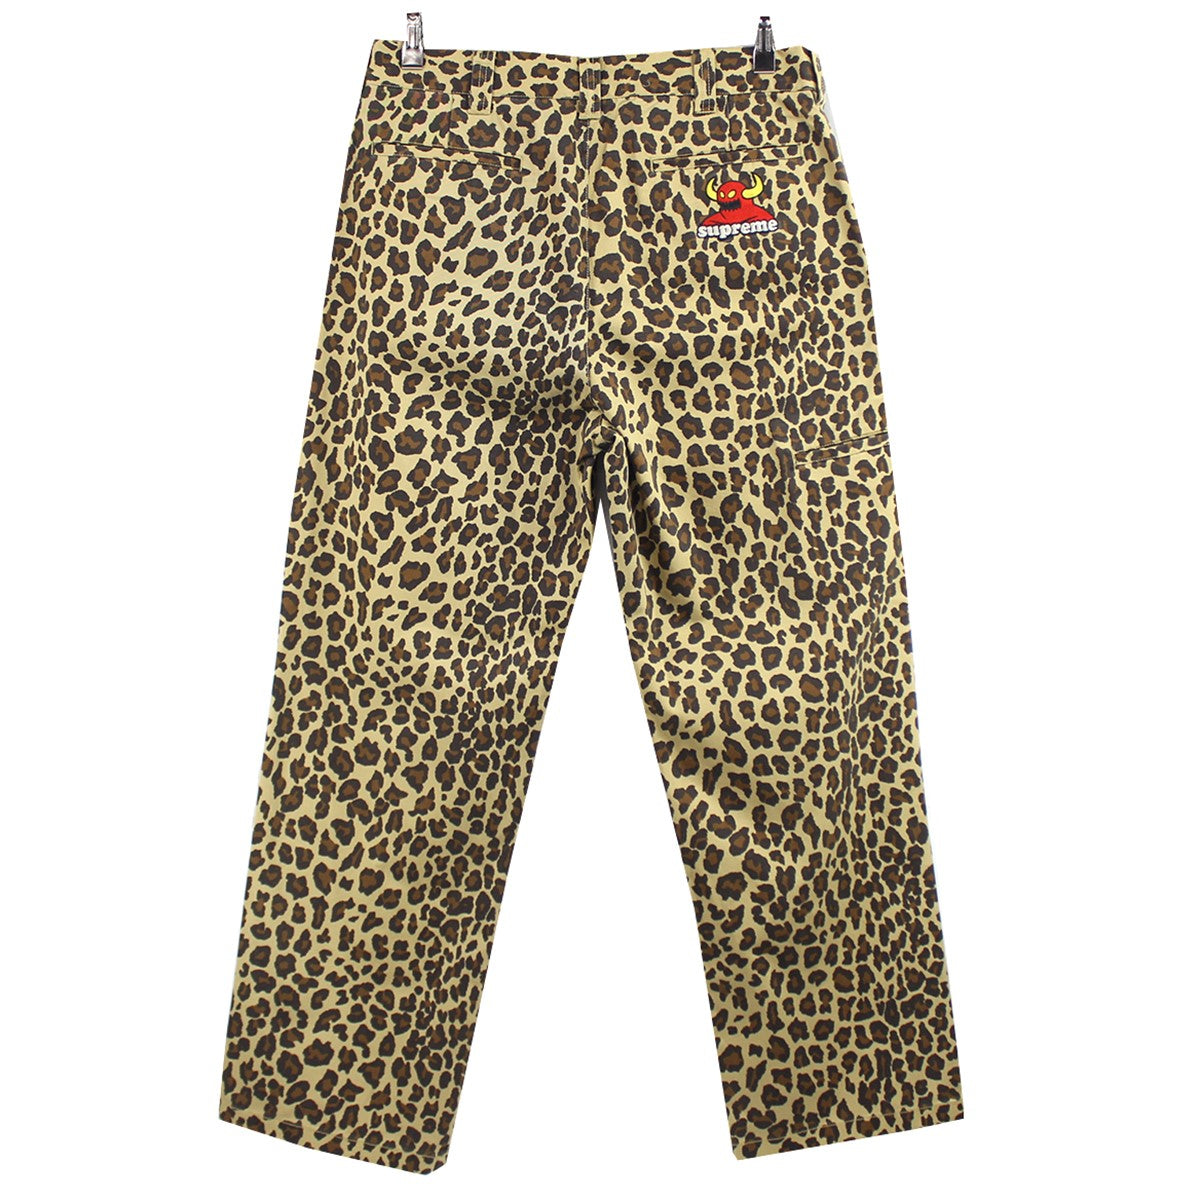 24SS Toy Machine Work Pant Leopard トイマシーン ワークパンツ